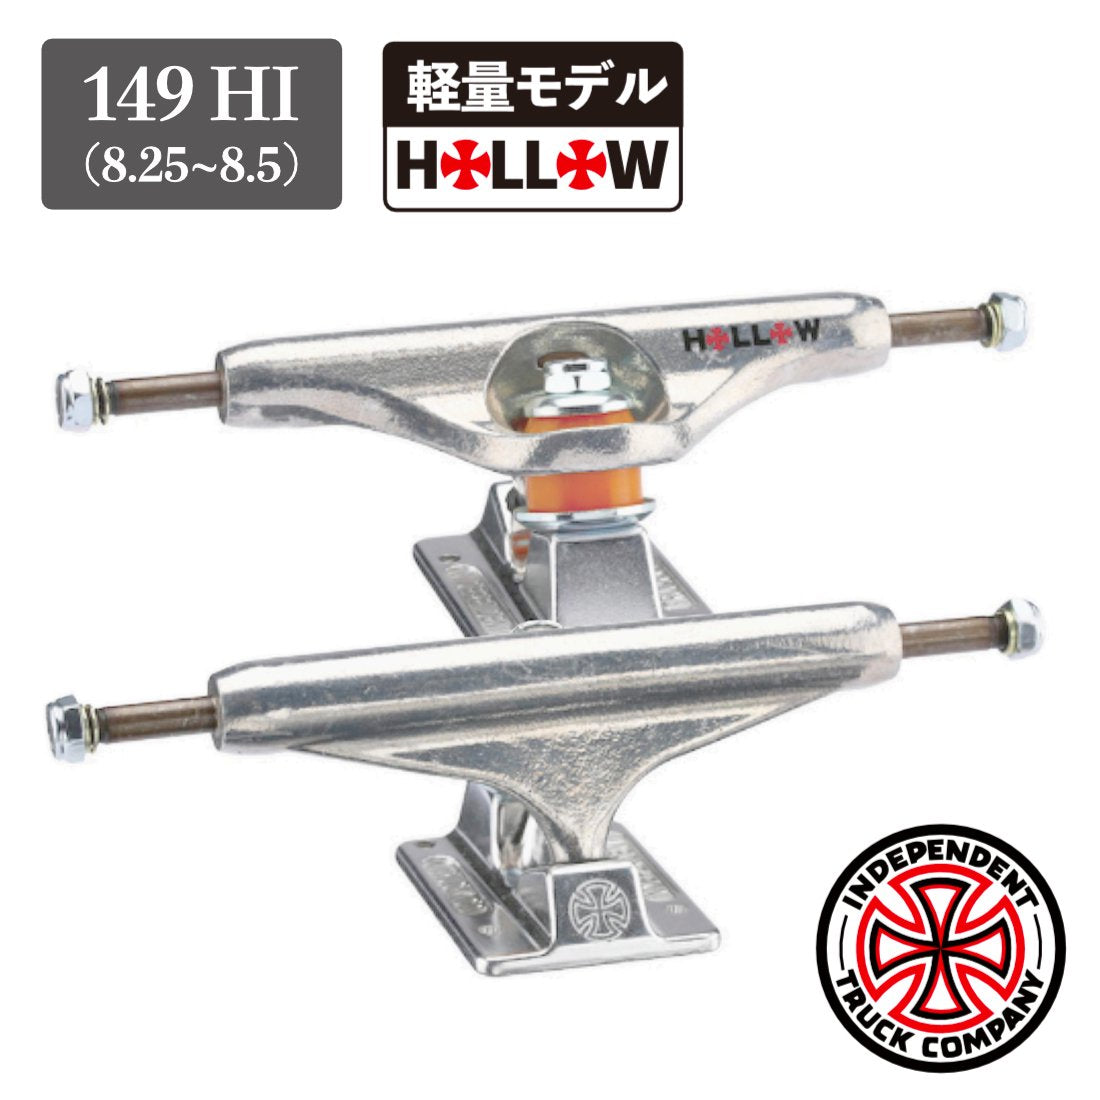 【INDEPENDENT】 Forged Hollow Standard - 149